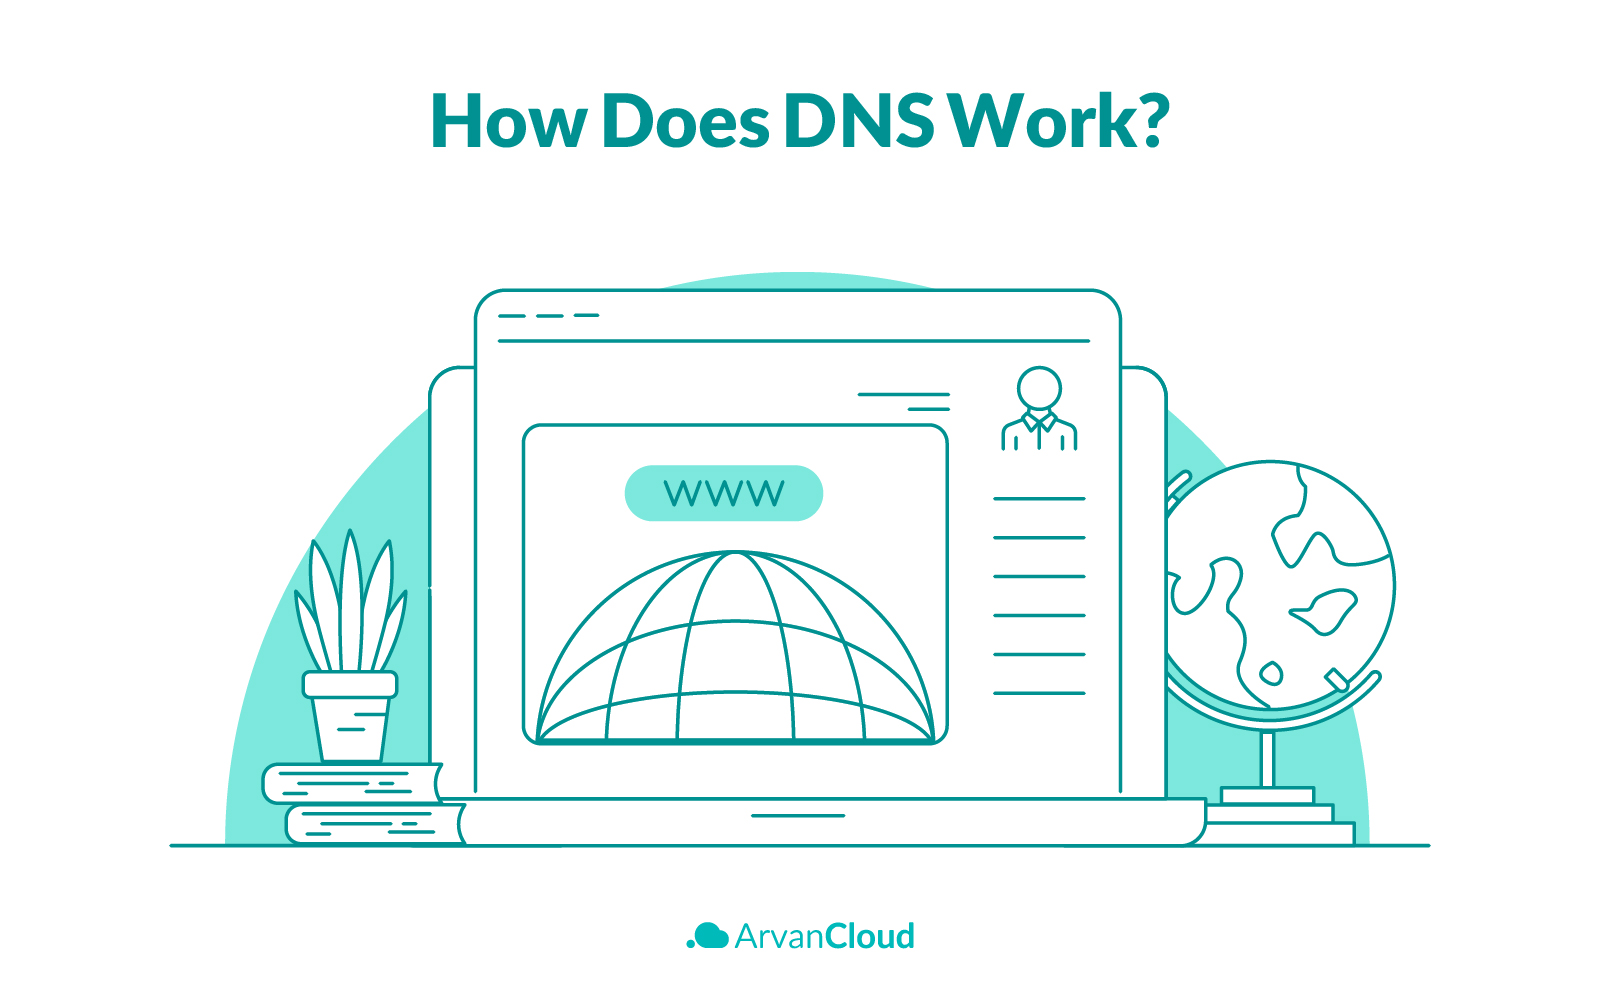 What is DNS?